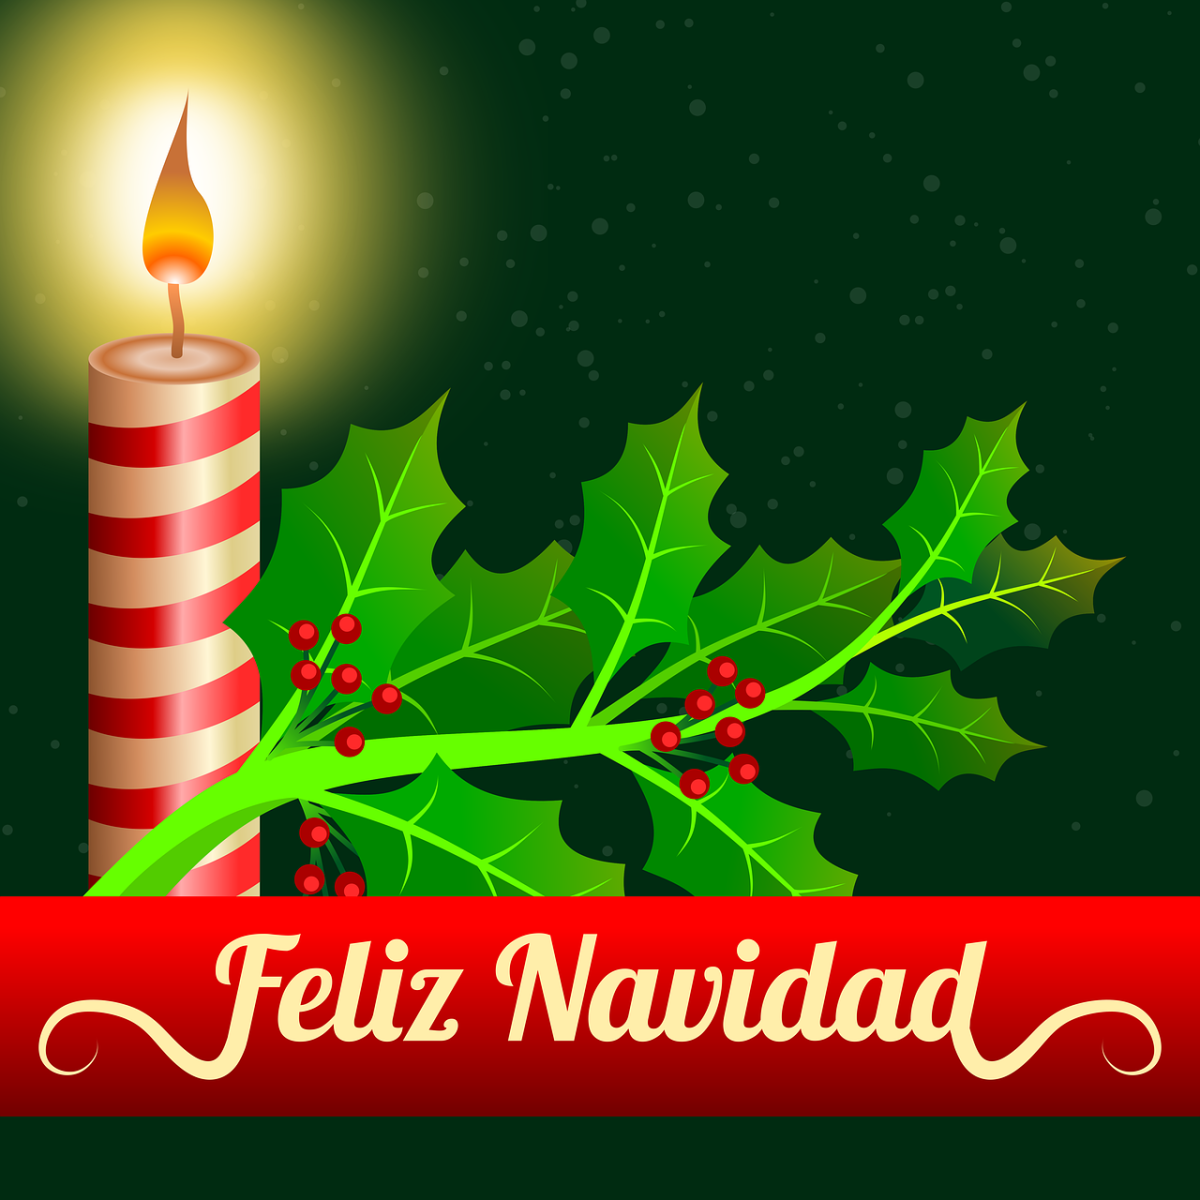 11 Christmas Songs in Spanish - Popular and Traditional